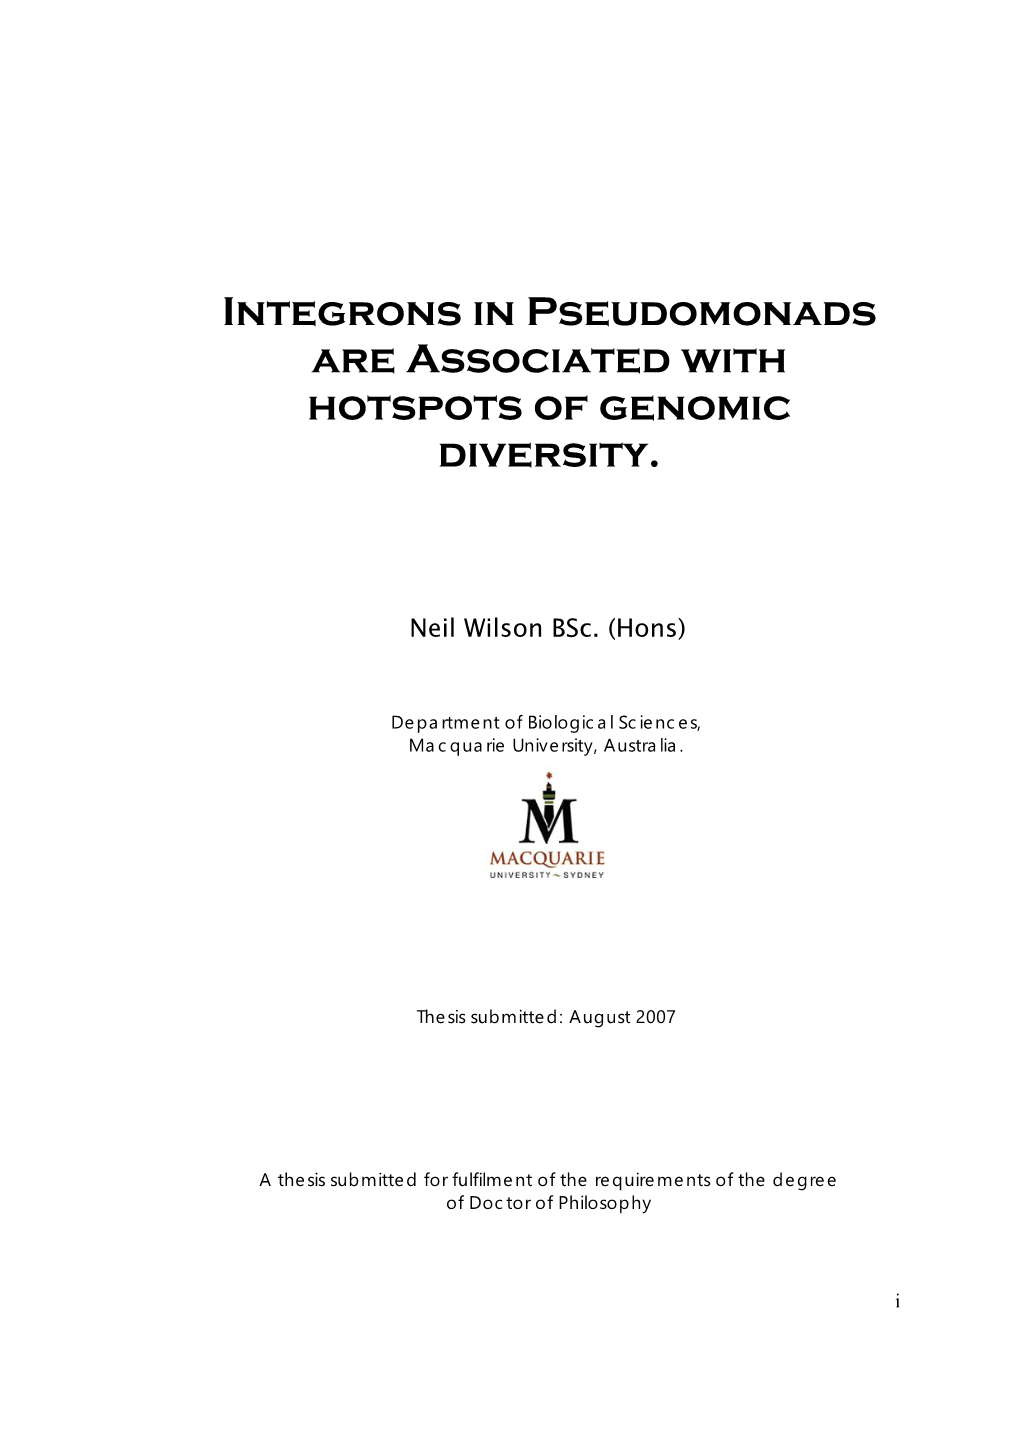 Integrons in Pseudomonads Are Associated with Hotspots of Genomic Diversity